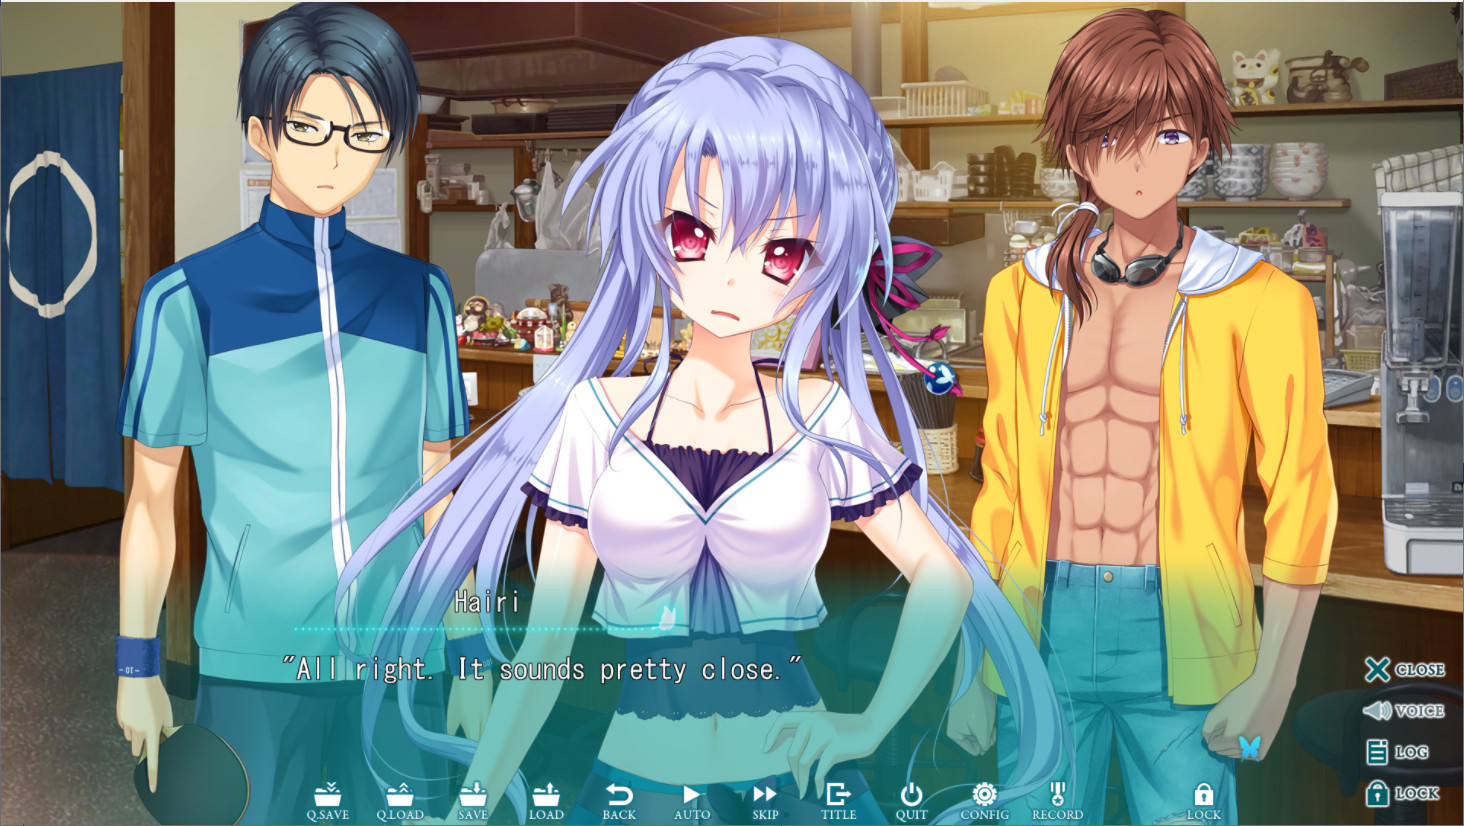 summer pockets review download free